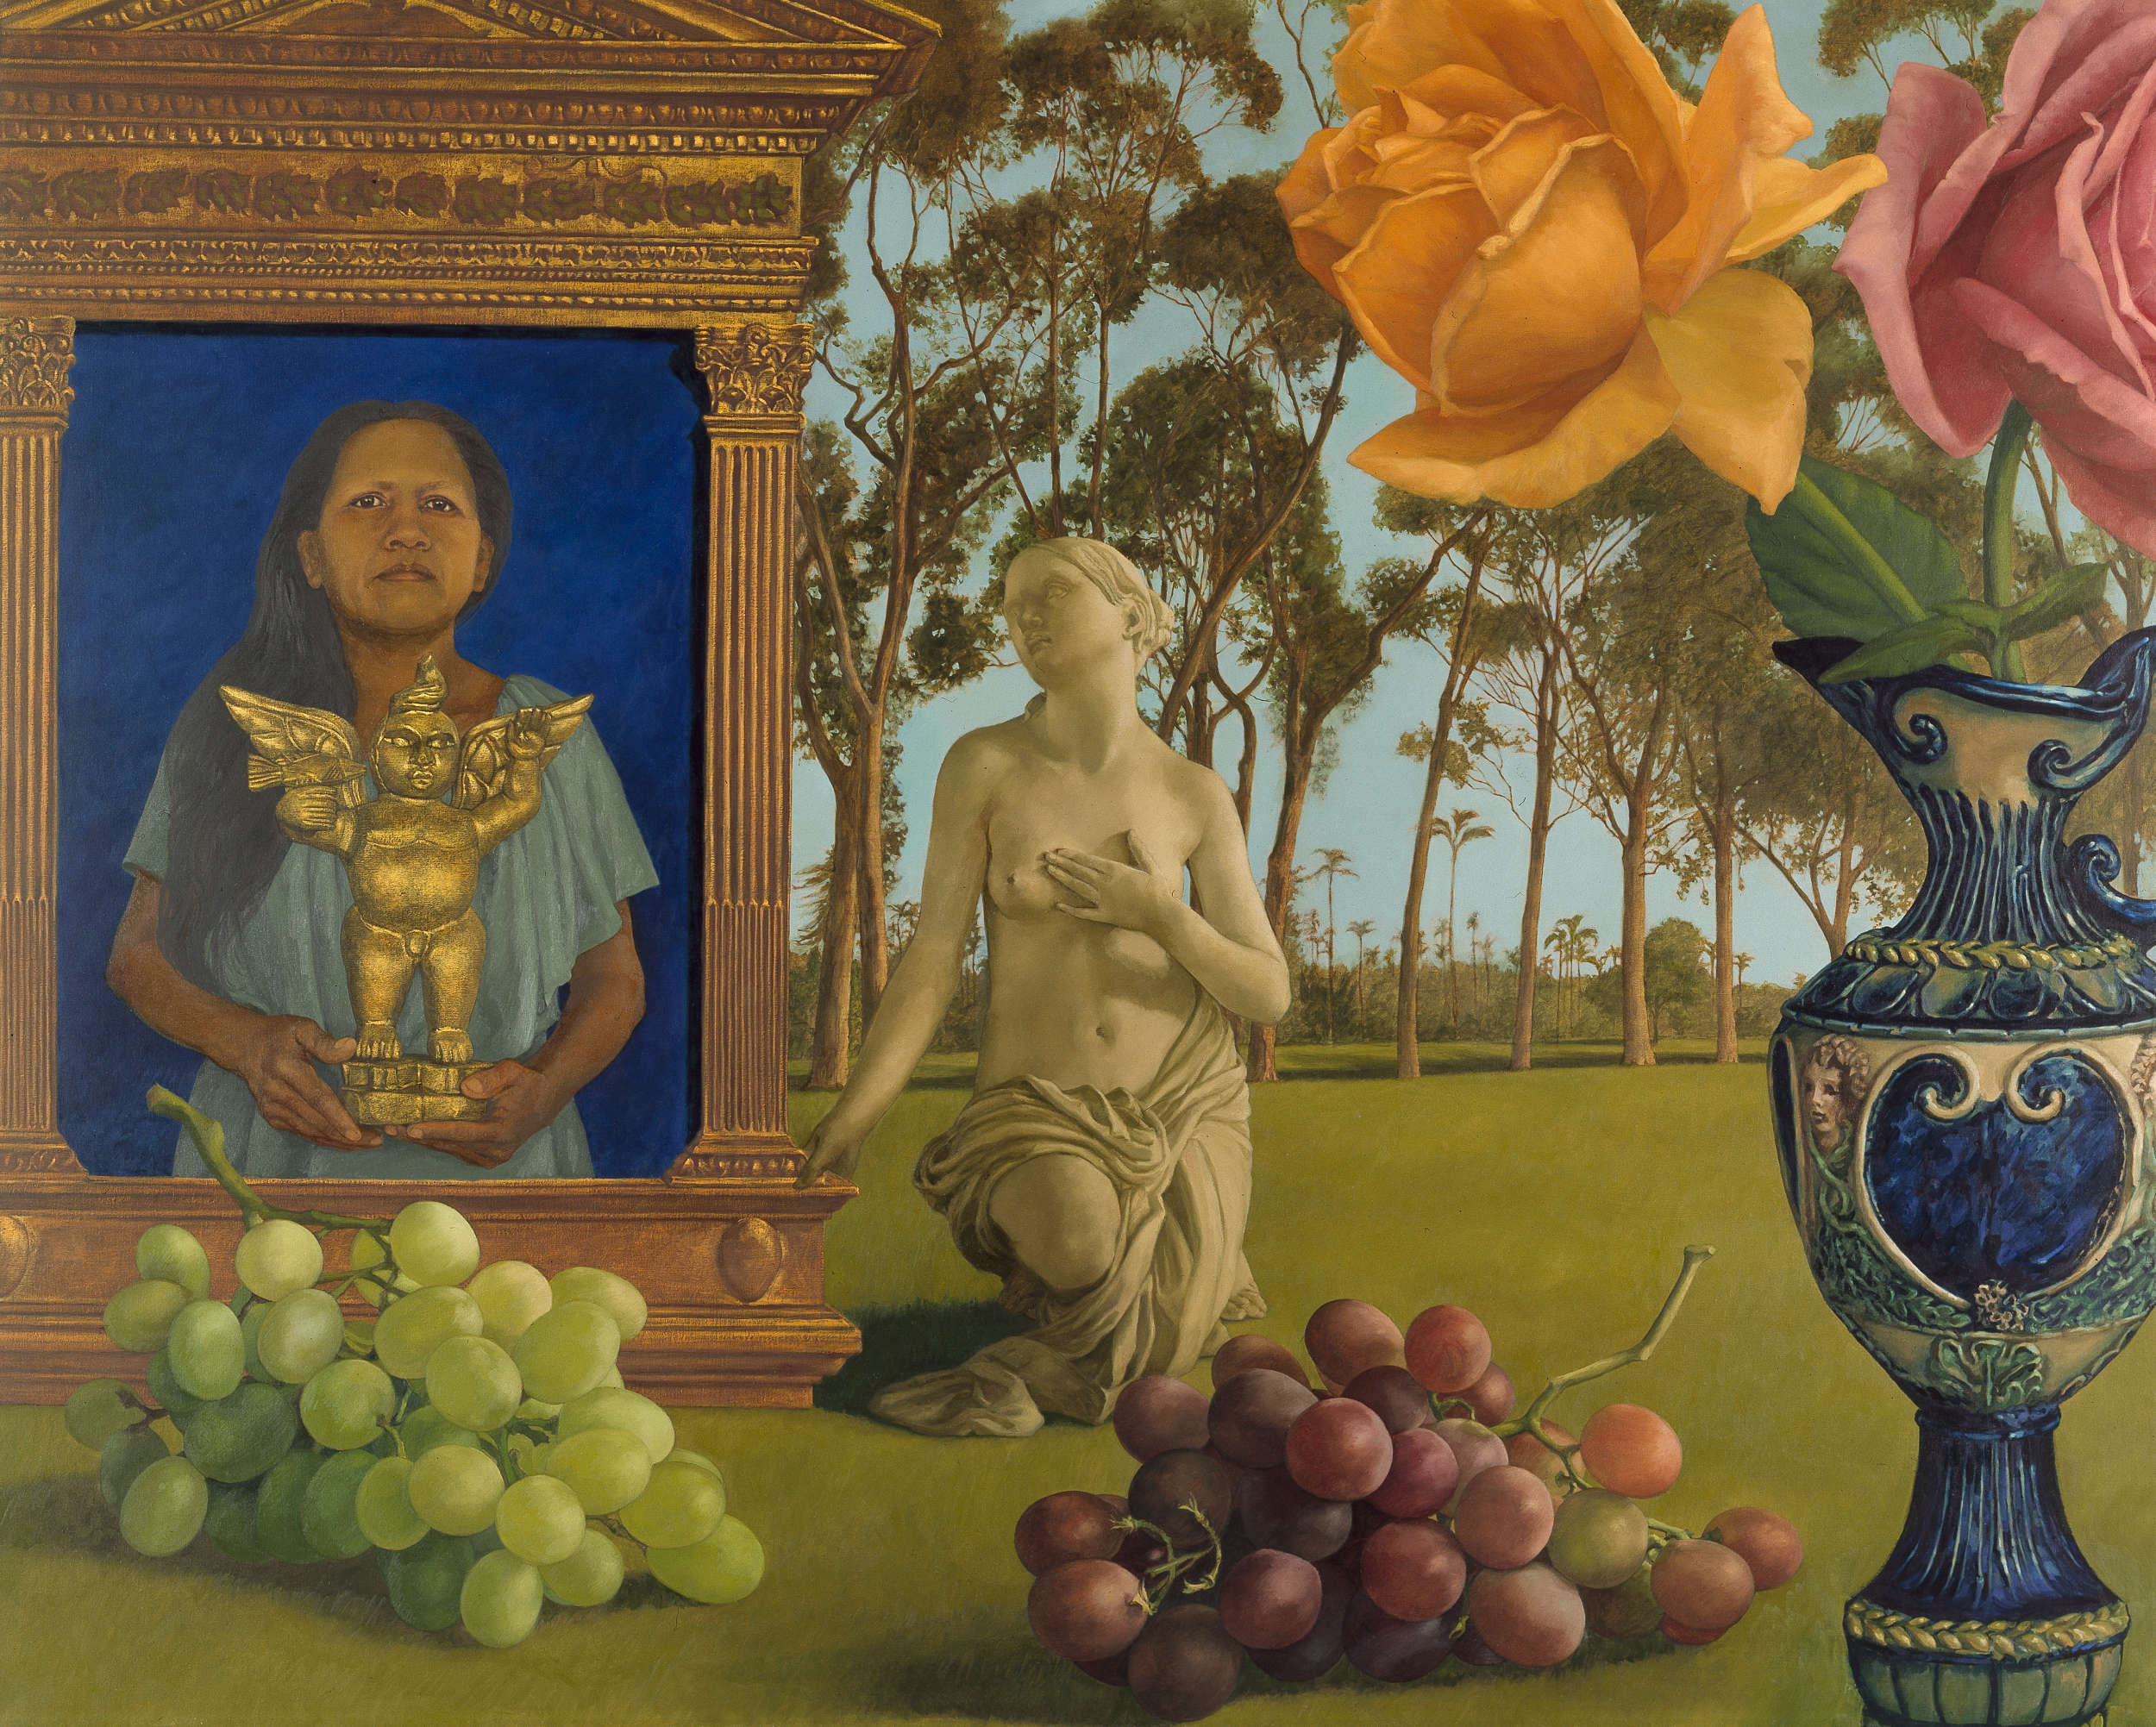 indigenous women holding aztec gold figure, in a gold carved Italian frame, peach and pink roses in ornate blue and white vase, giant grapes, sculpture of woman, trees, landscape